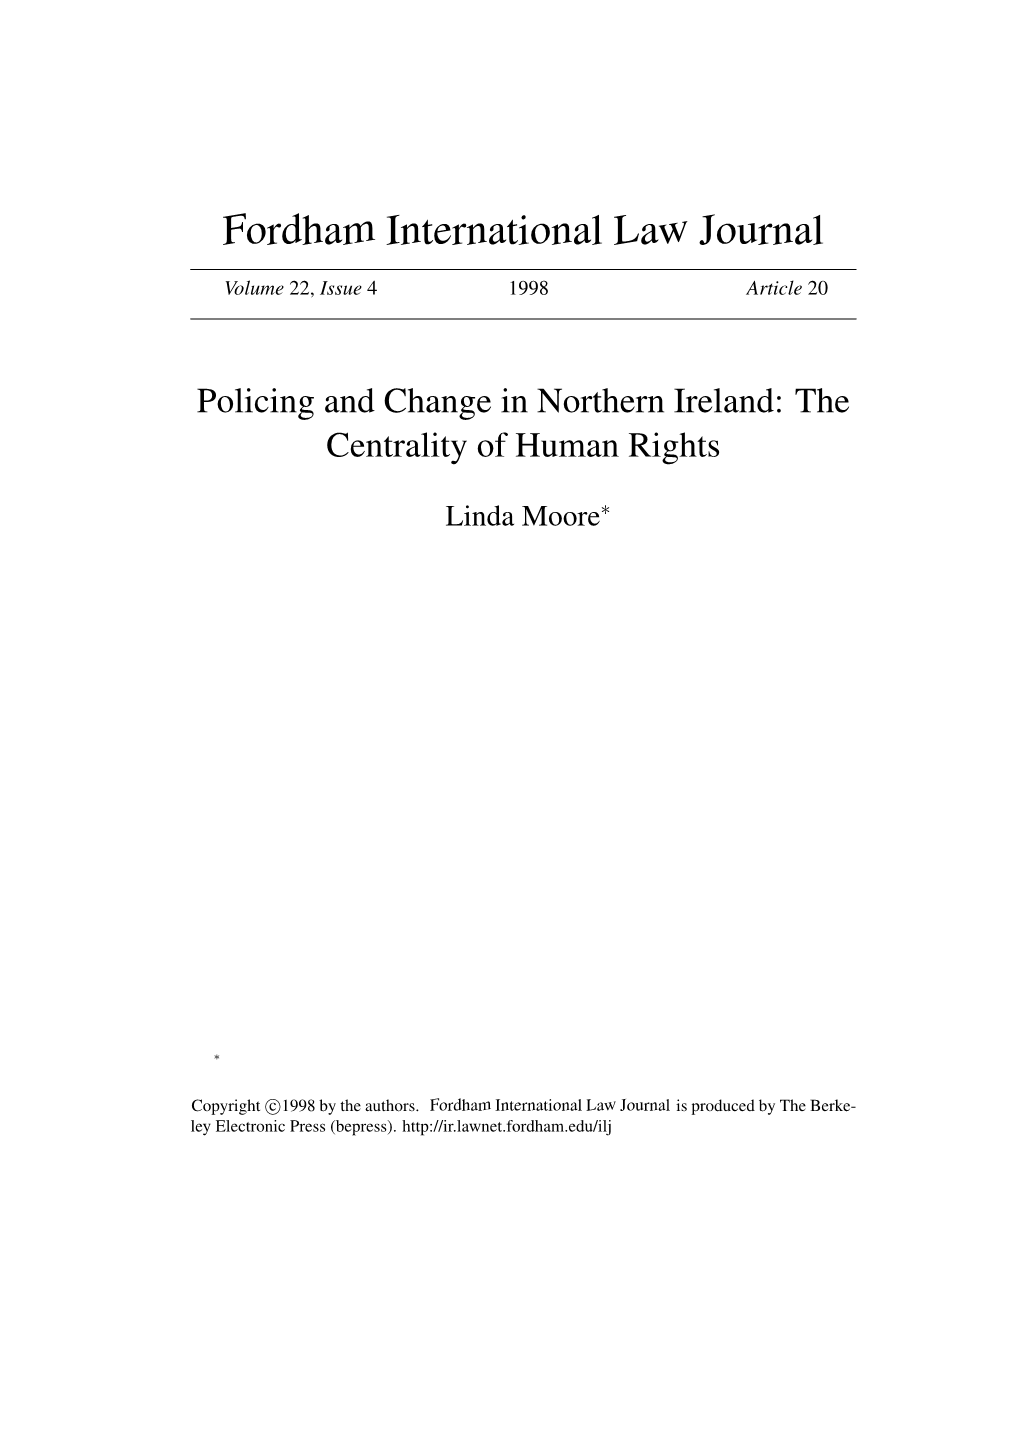 Policing and Change in Northern Ireland: the Centrality of Human Rights